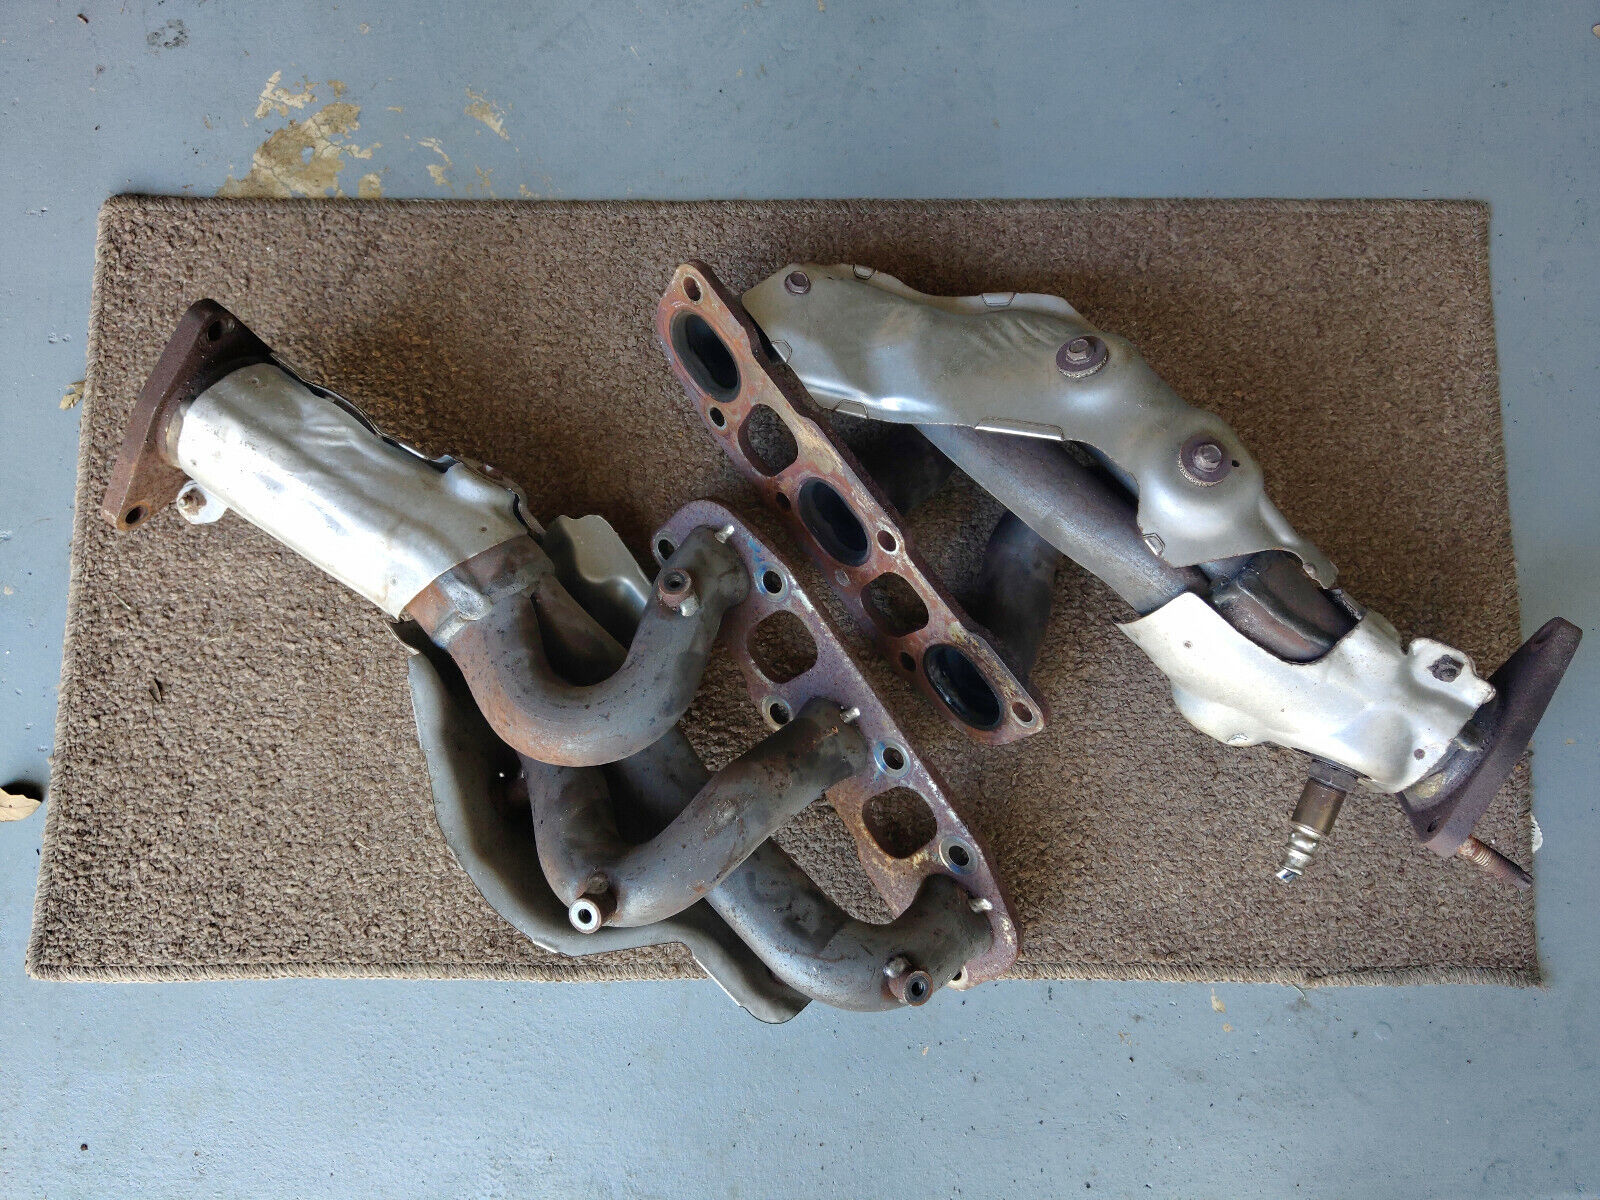 08-13 Infinti G37 Coupe Oem Exhaust Manifold / Headers - Left and Right